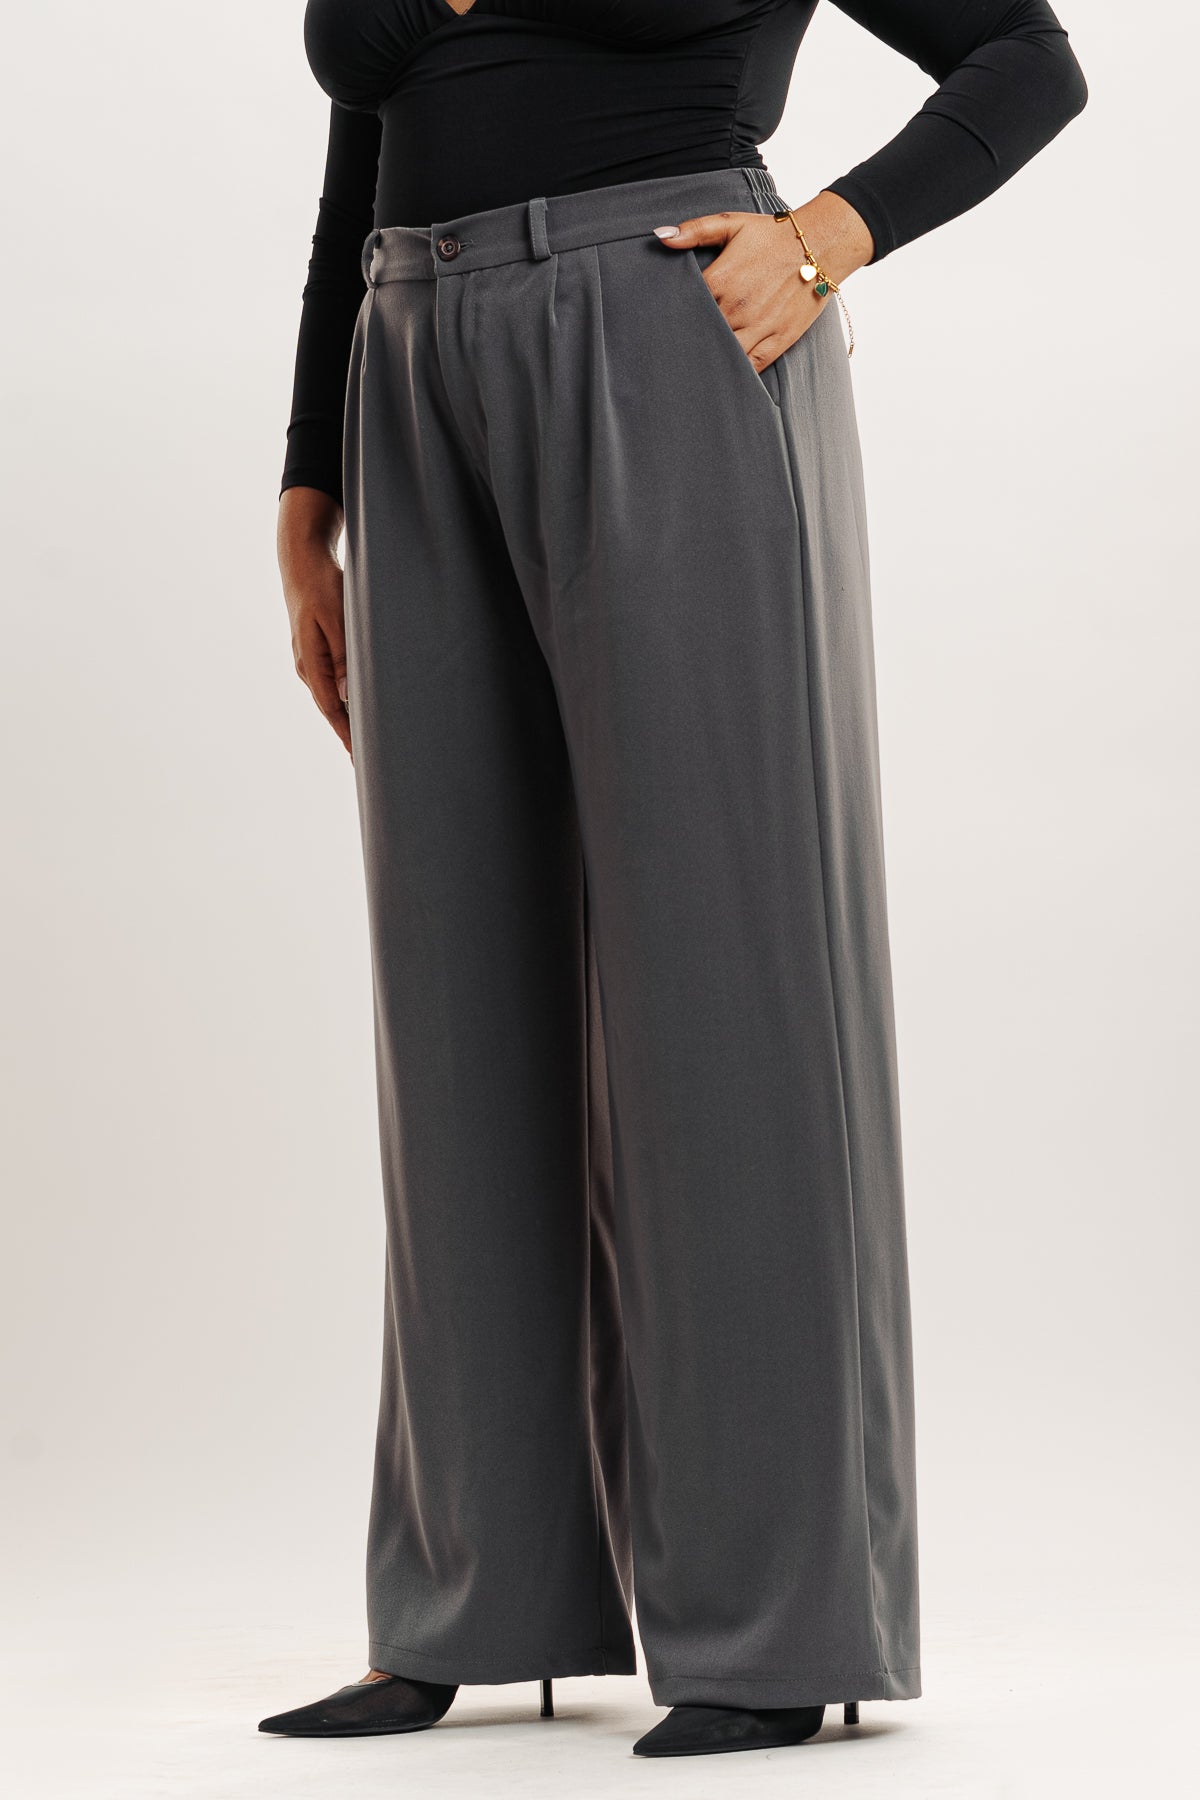 GREY PLEATED STRAIGHT FIT CURVE KOREAN PANT